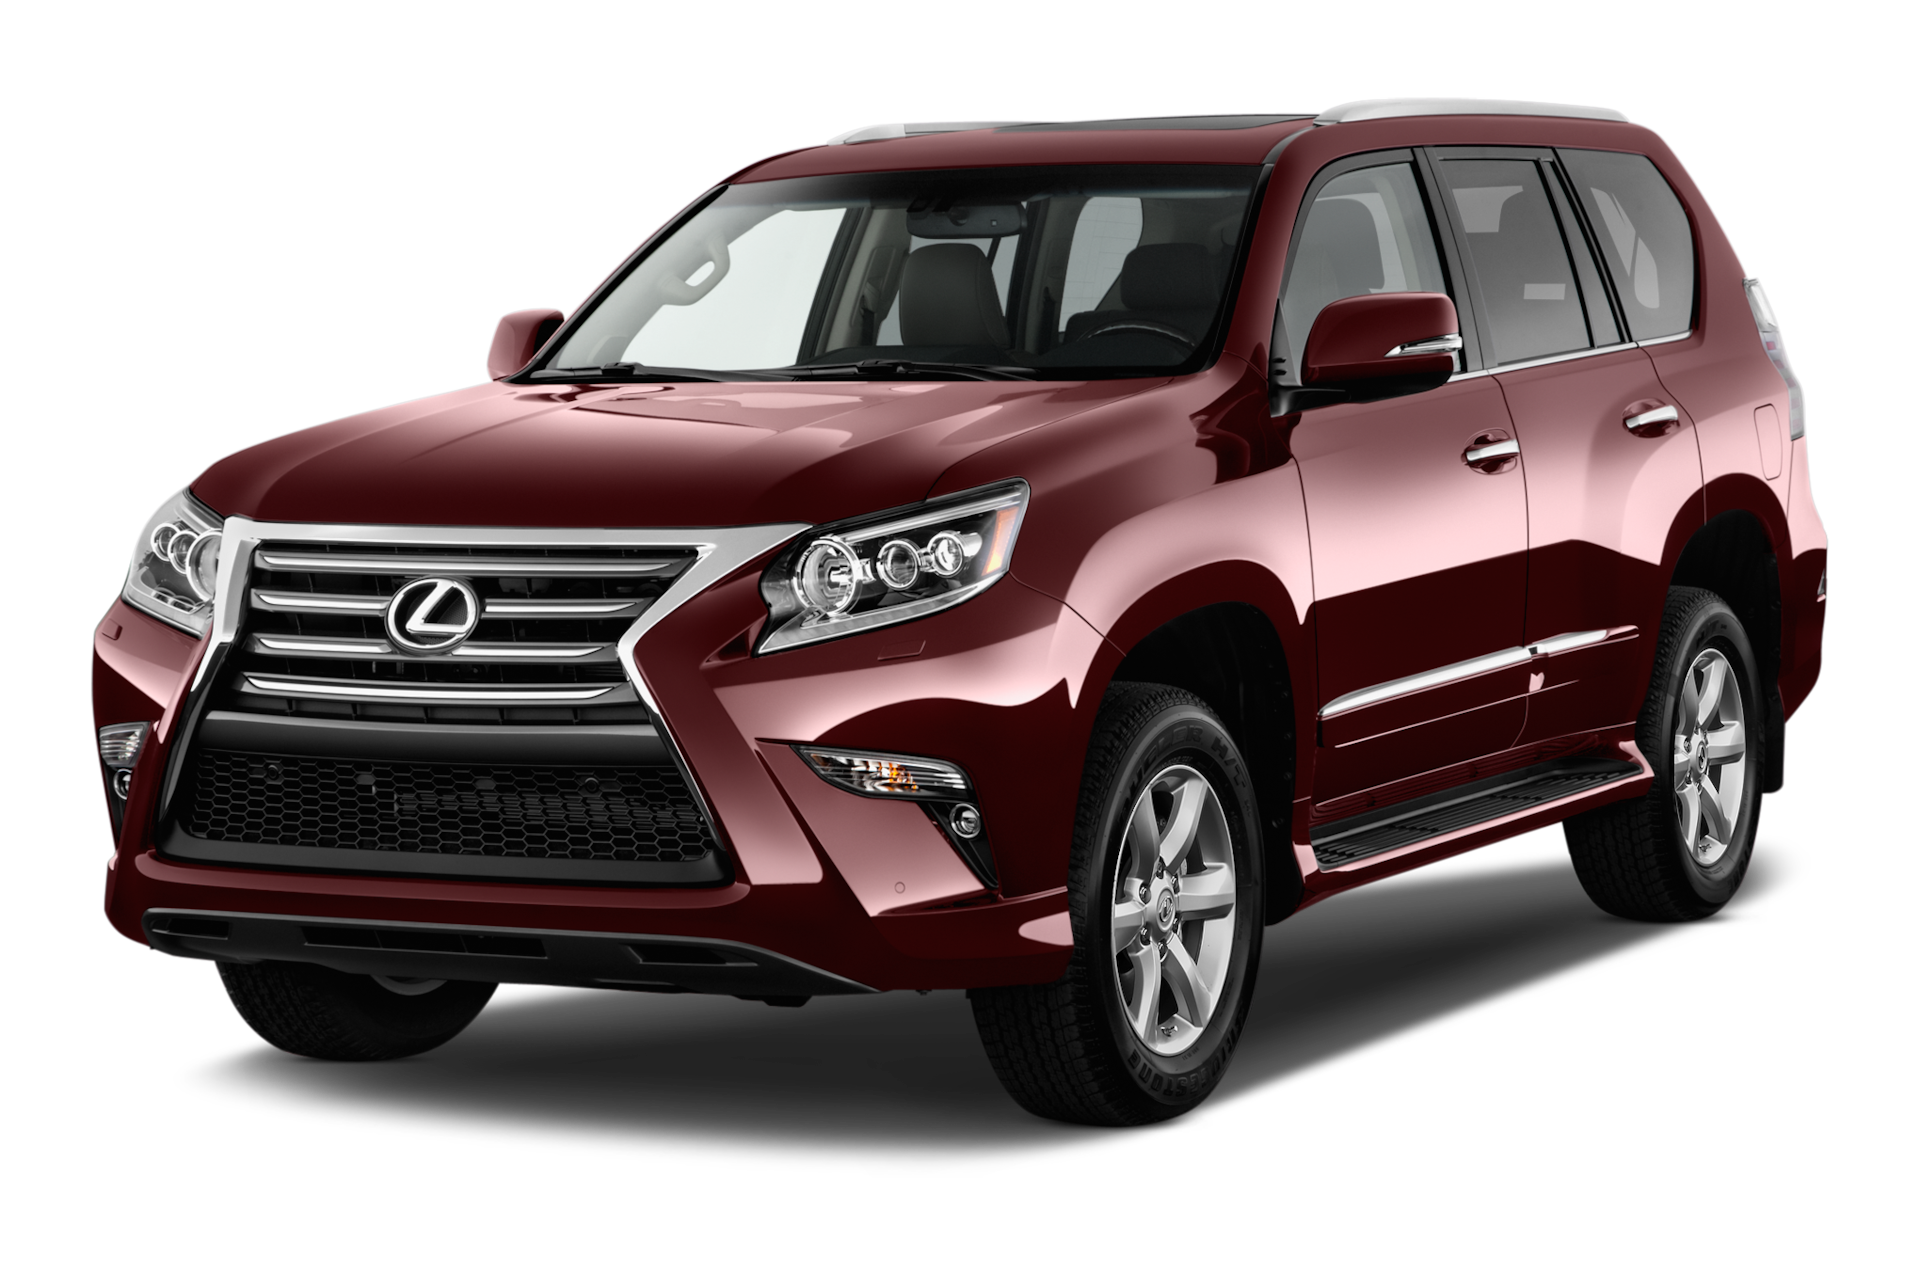 2018 Lexus GX Prices, Reviews, and Photos - MotorTrend